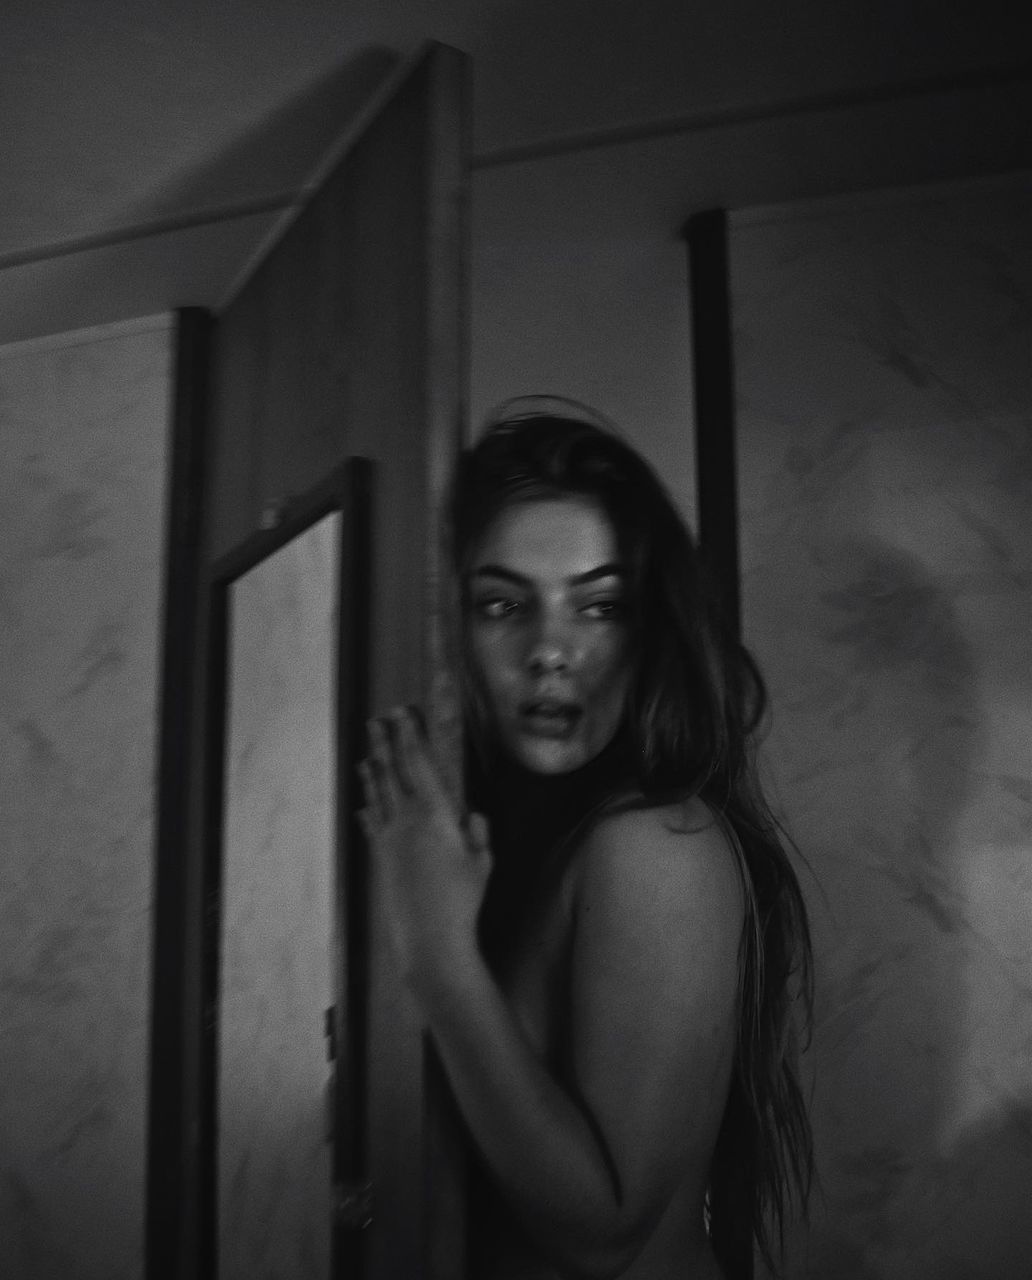 one person, black, portrait, black and white, looking at camera, white, darkness, adult, young adult, women, indoors, fear, monochrome photography, dark, monochrome, standing, hairstyle, long hair, door, spooky, emotion, waist up, horror, entrance, loneliness